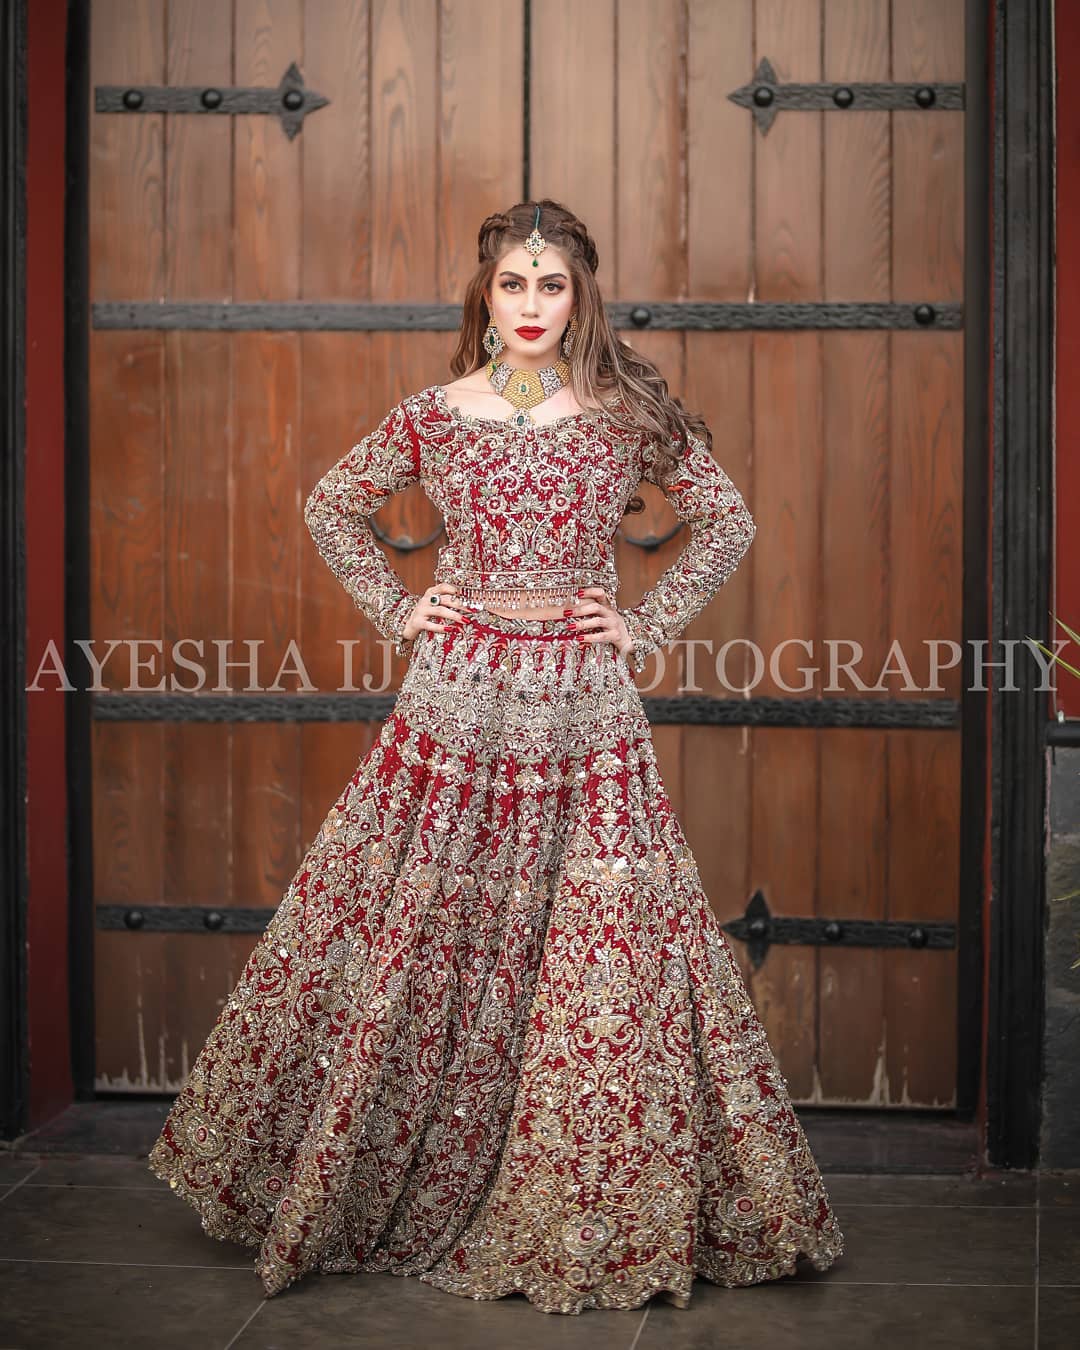 Actress Sadia Faisal Looking Awesome in her New Bridal Shoot